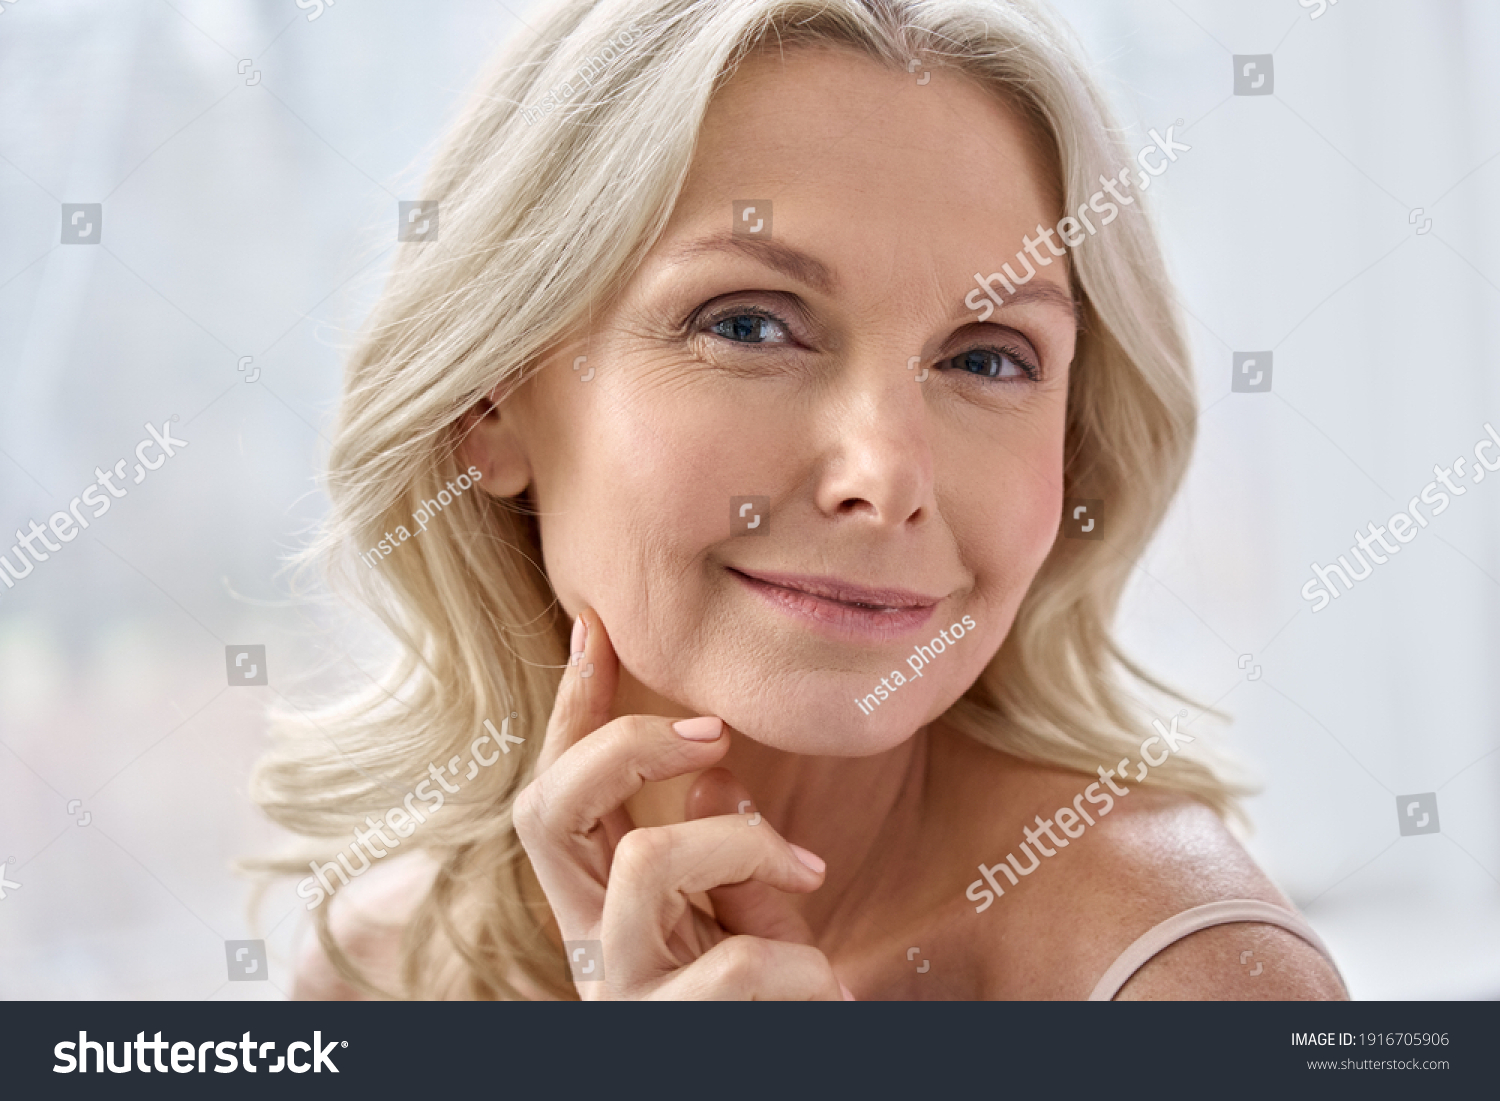 Smiling happy attractive 50s middle aged mature blond woman, old lady looking at camera advertising anti age face skin and body care treatment cosmetics posing in bathroom. Close up headshot portrait #1916705906